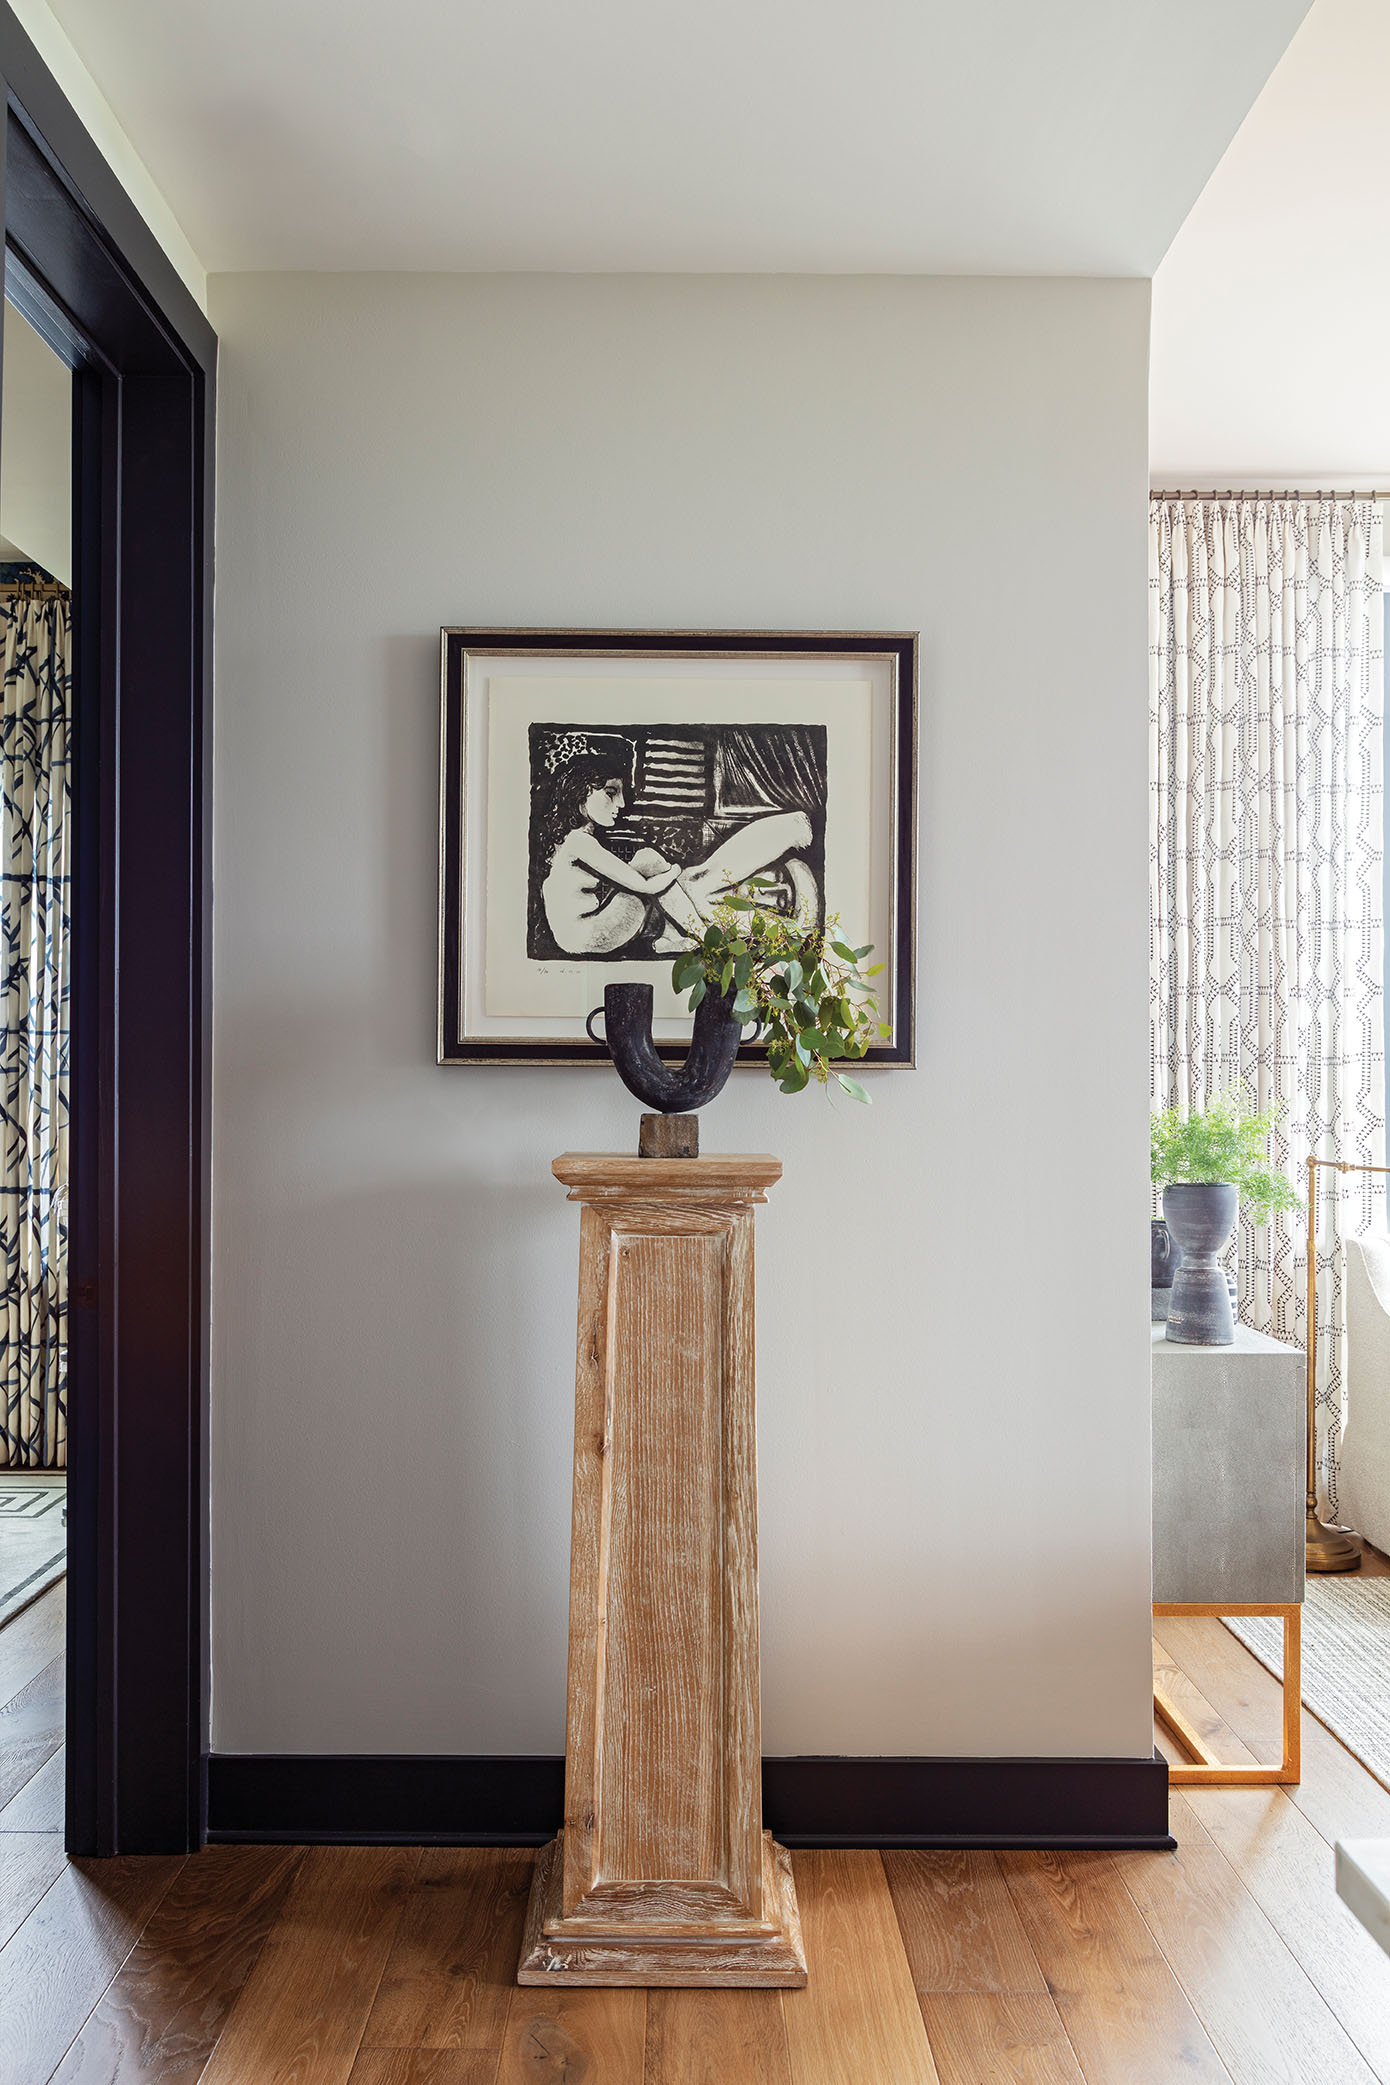 A pedestal from CB2 showcases a Kalalou vase backed by an original painting by Dutch contemporary artist Erik Renssen.